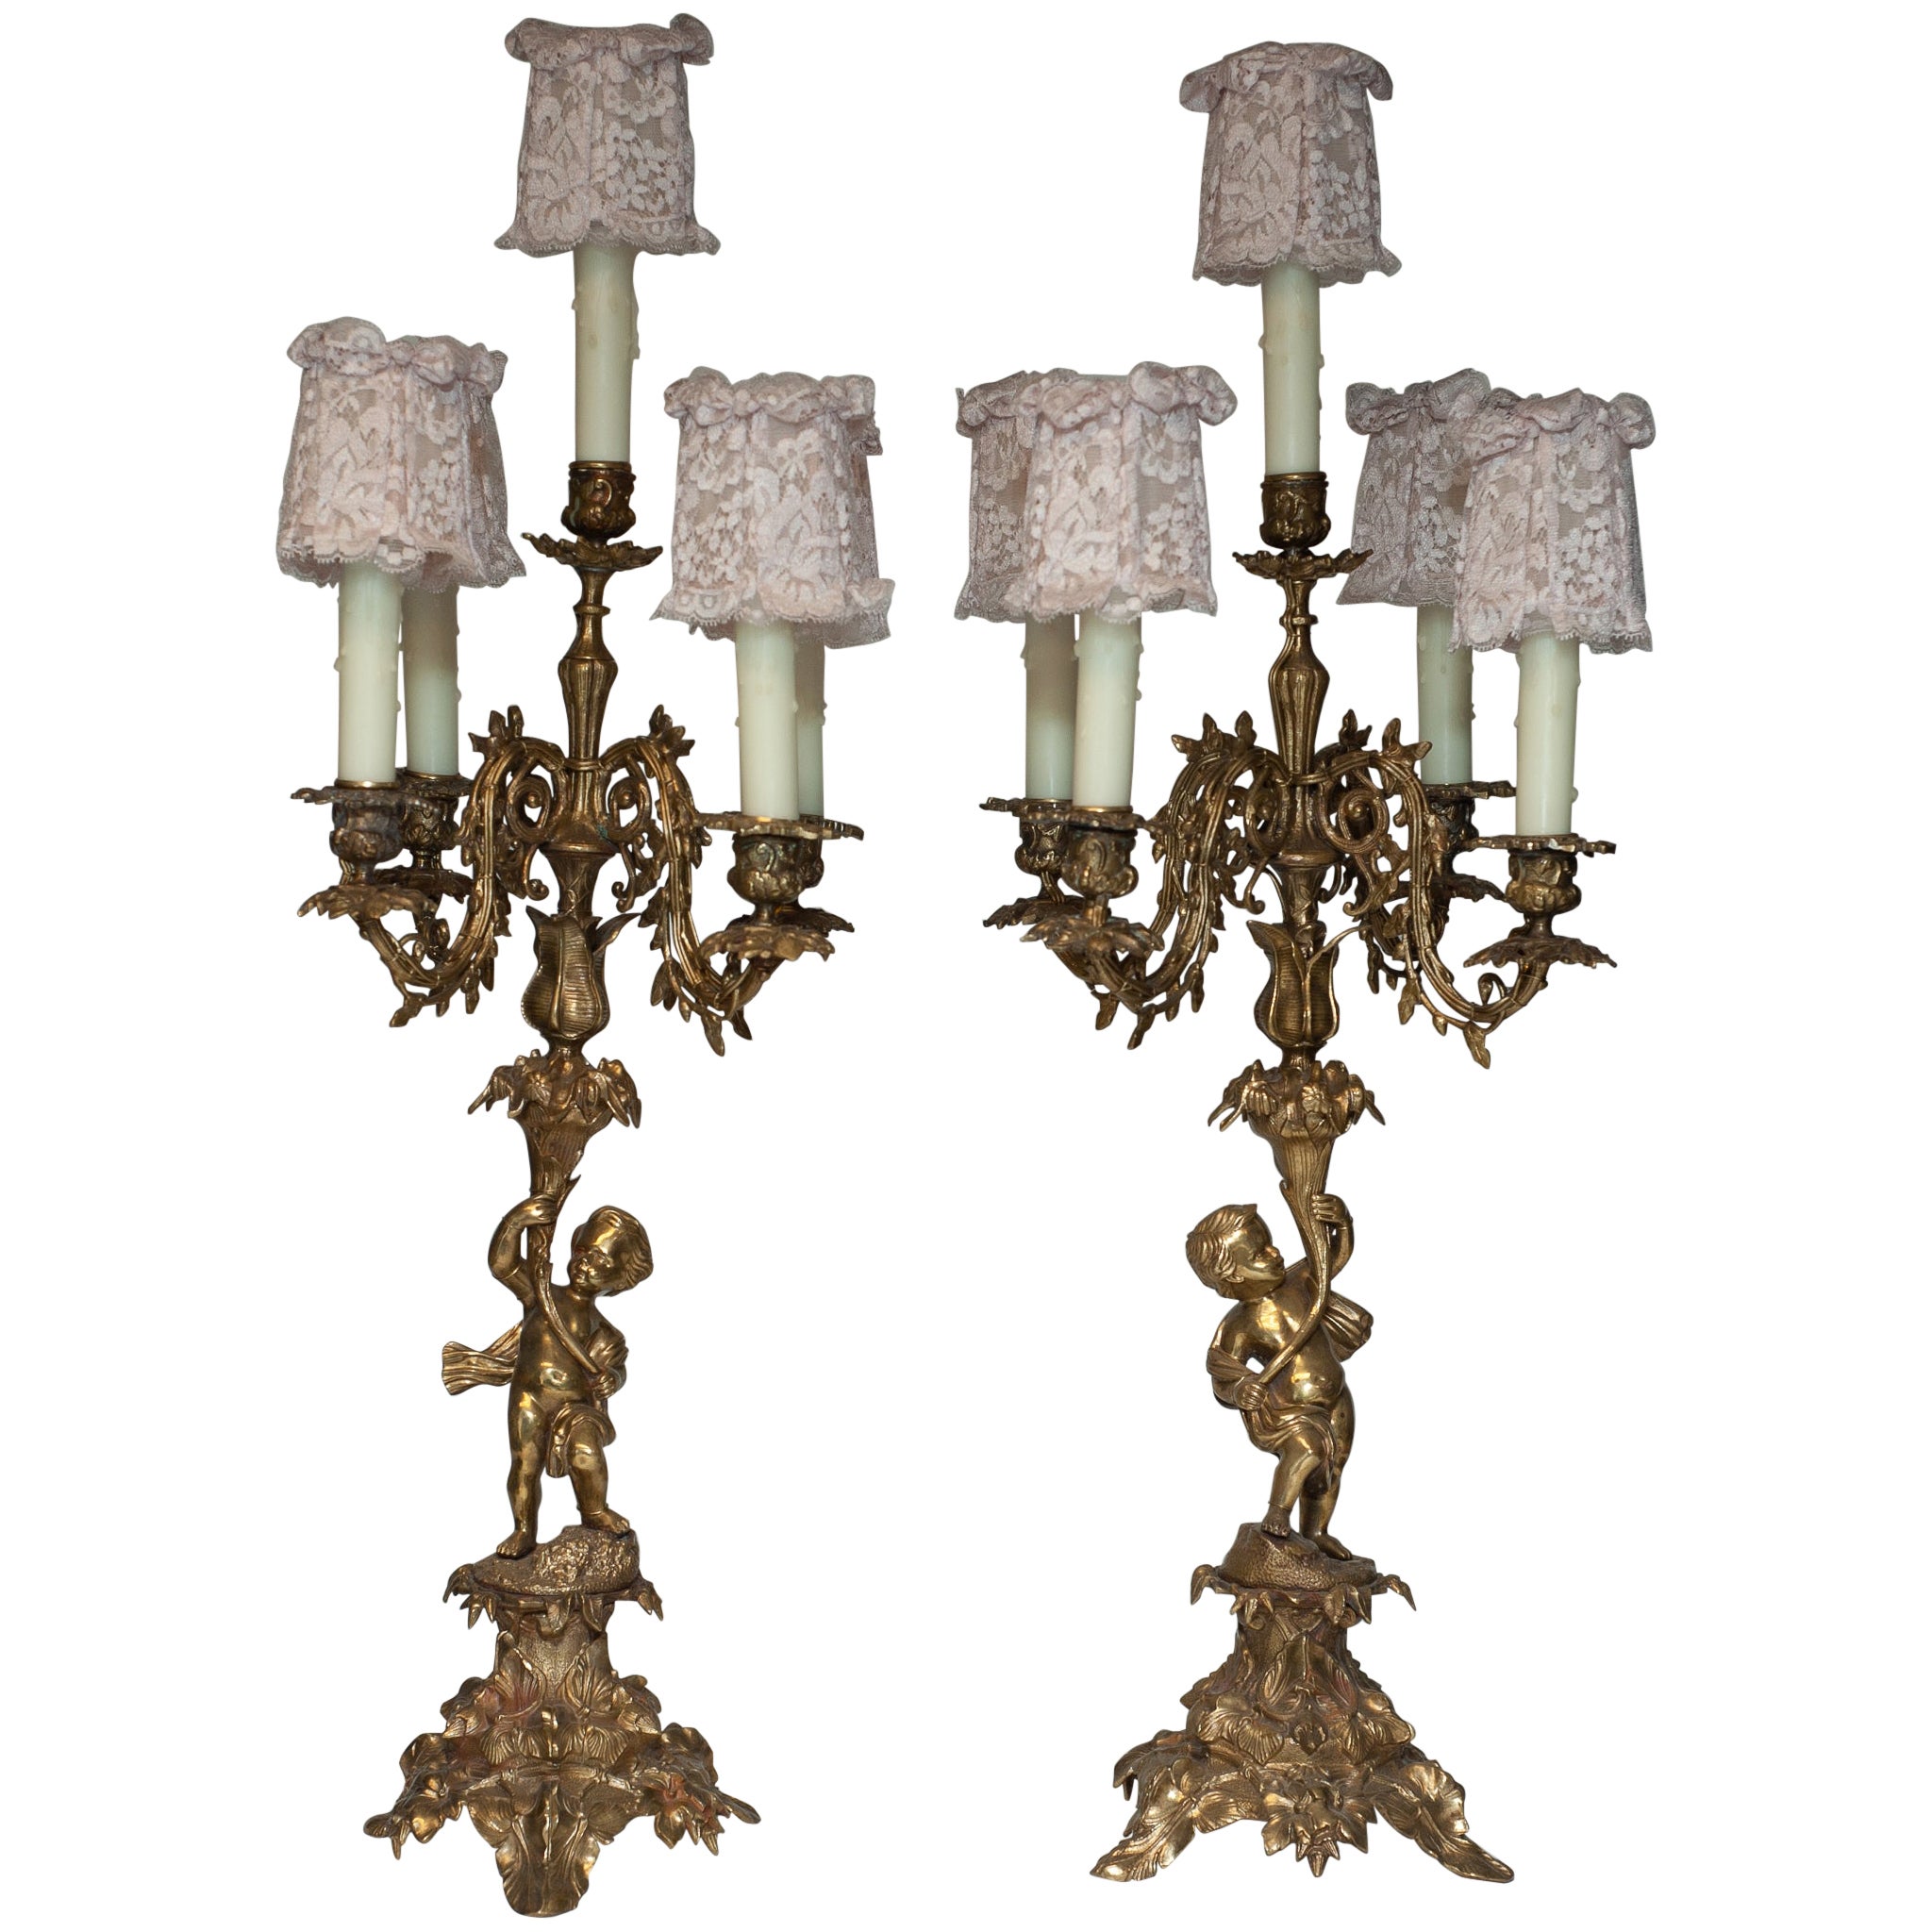 Antique Pair of French Bronze Lamps with Handmade Pink Lace Shades